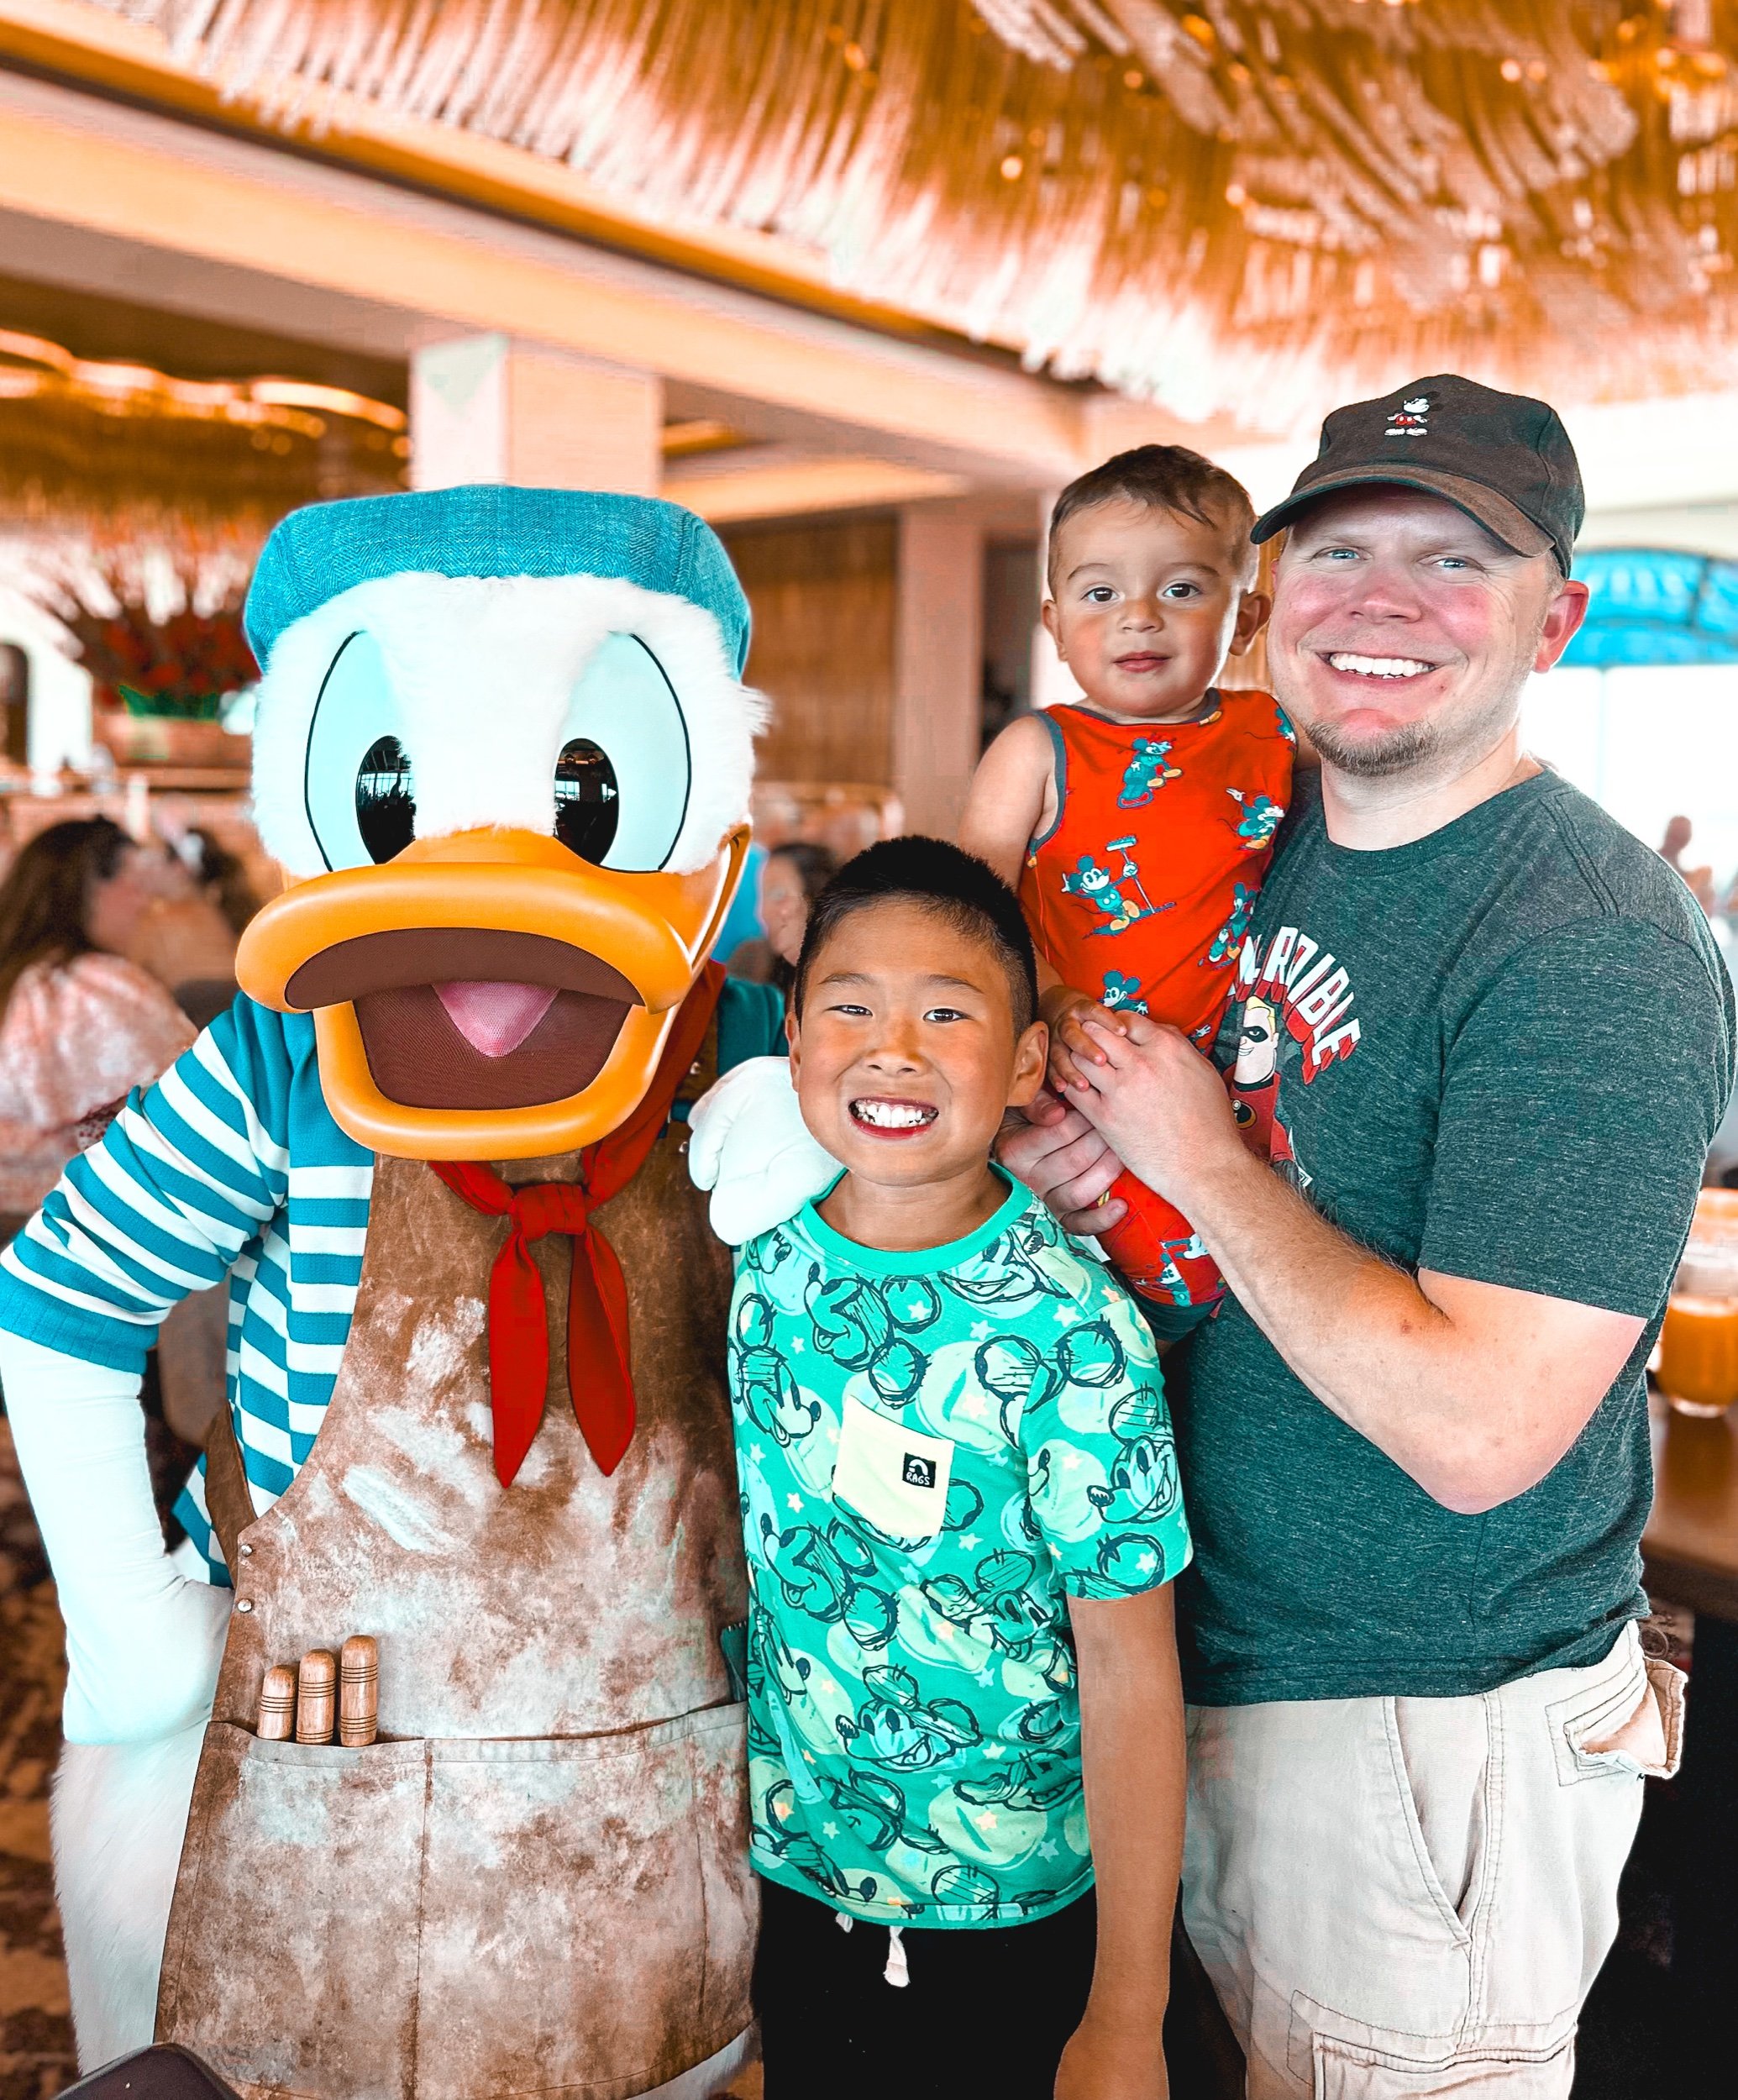 Meeting Donald Duck at Topolino’s Terrace